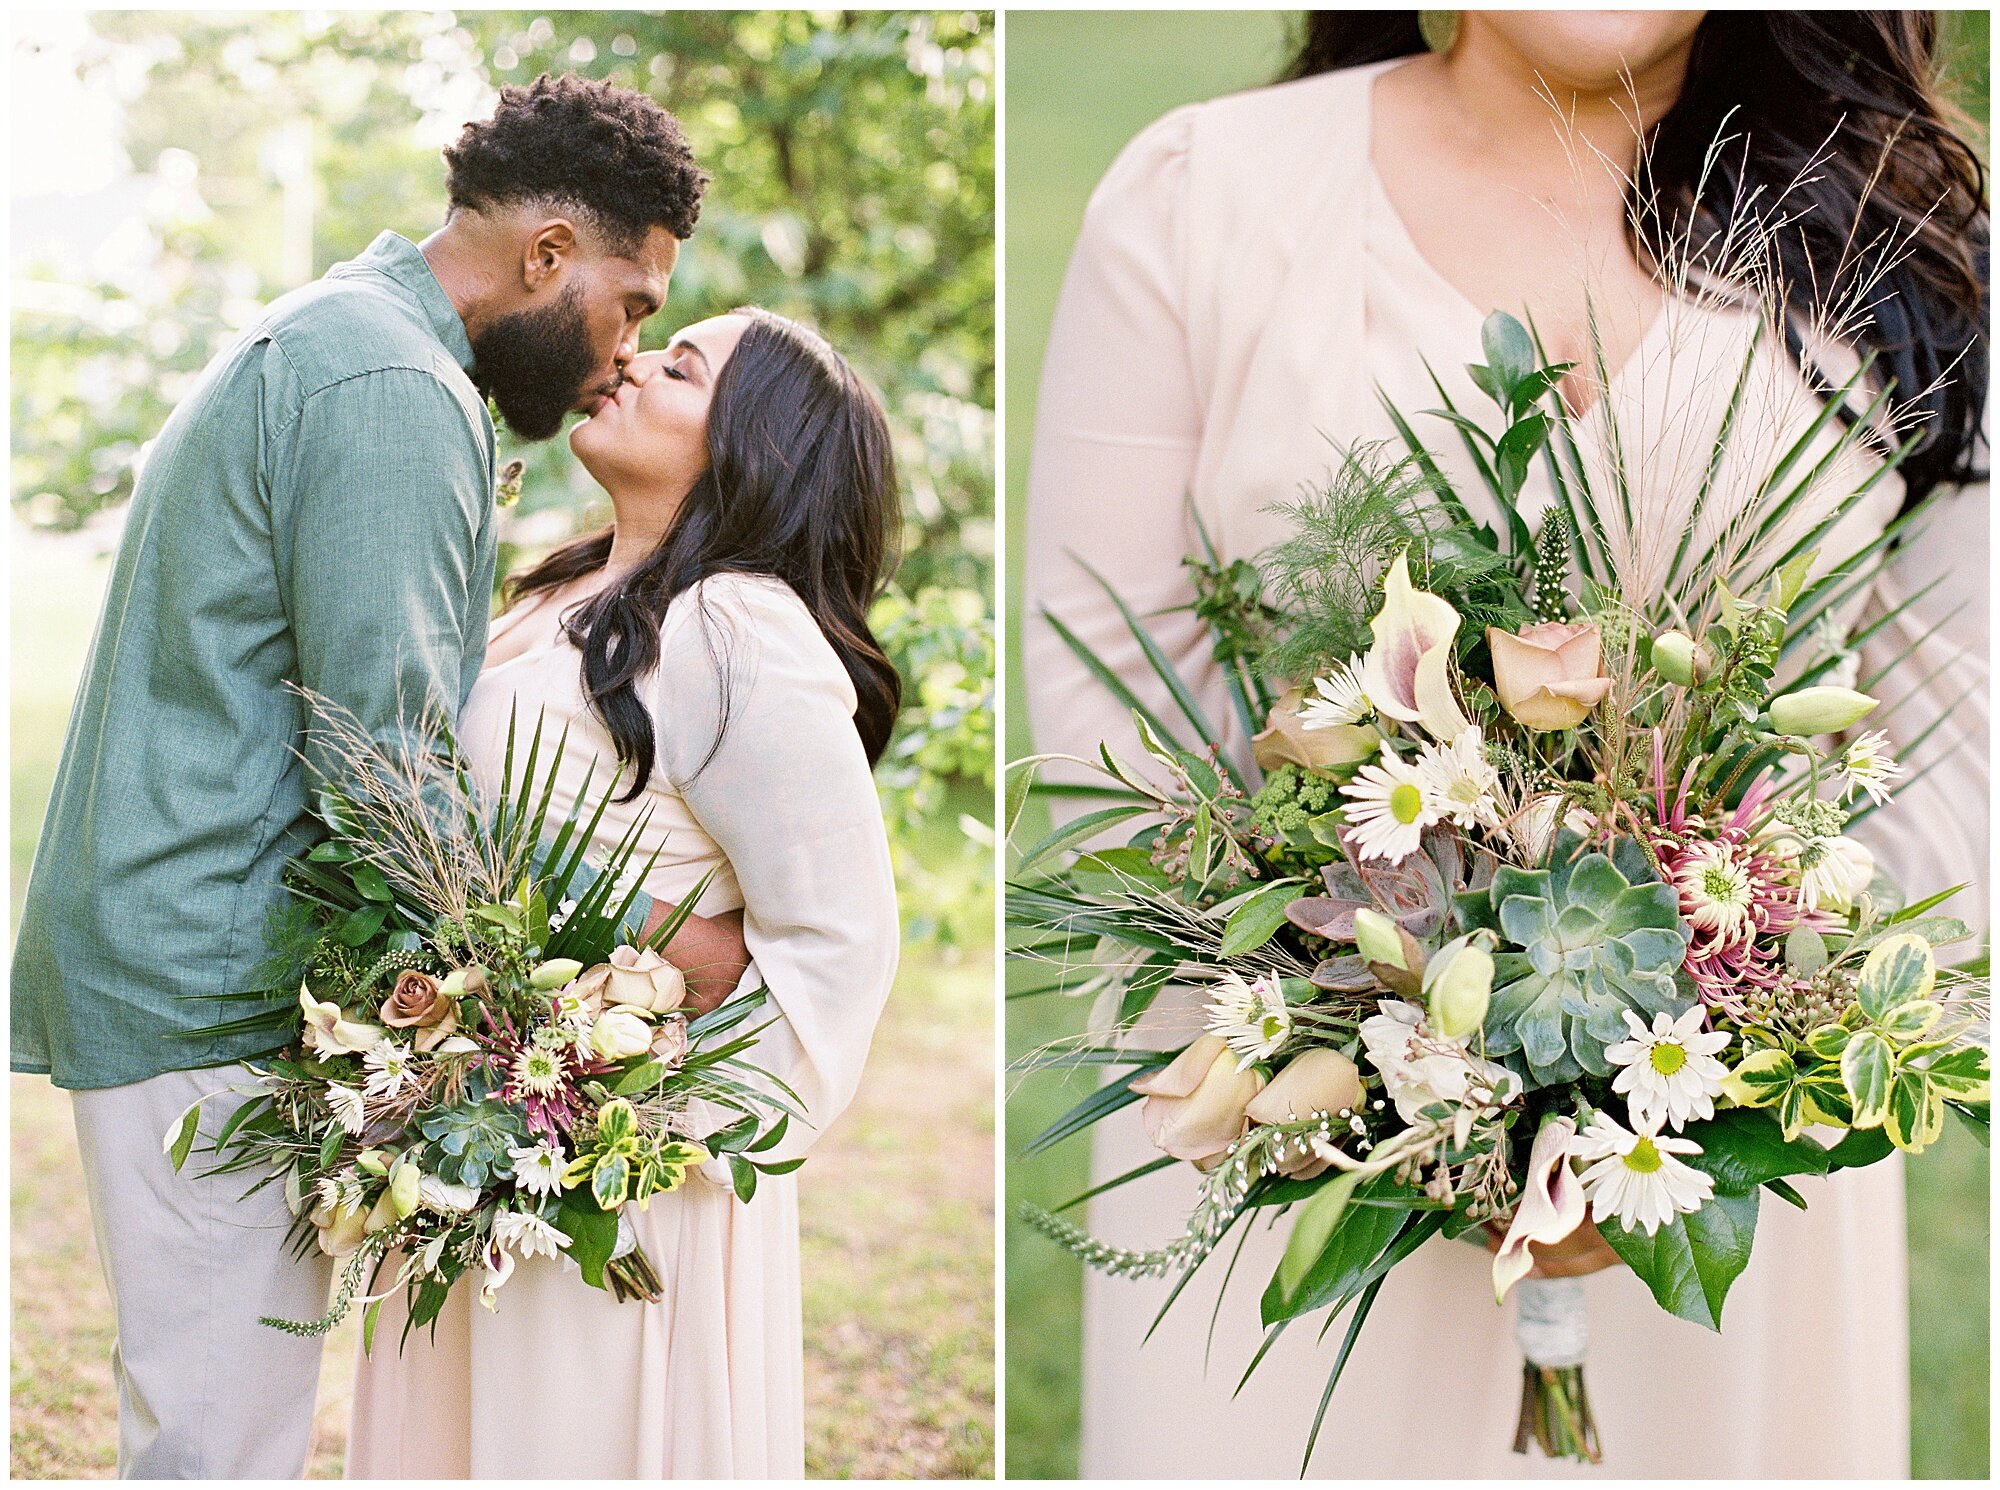 l love that Stephanie brought a bouquet for her engagement photos!!